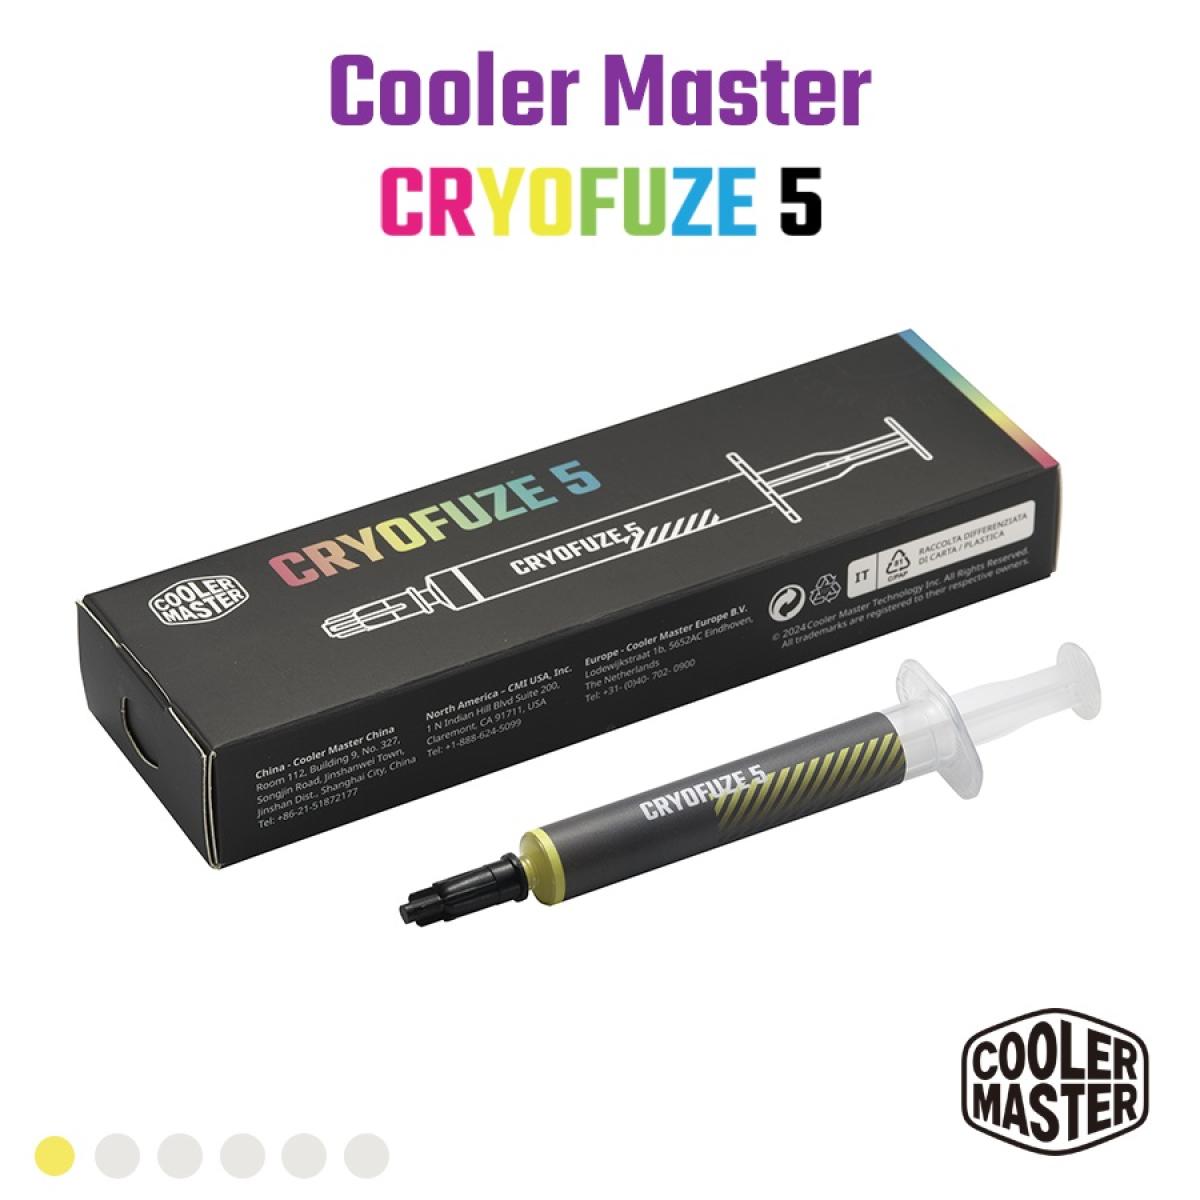 Cooler Master CRYOFUZE 5 (Yellow) High performance Thermal Paste, 12.6 W/mK High Thermal Conductivity w/ Low Thermal Impedance - 3g Weight